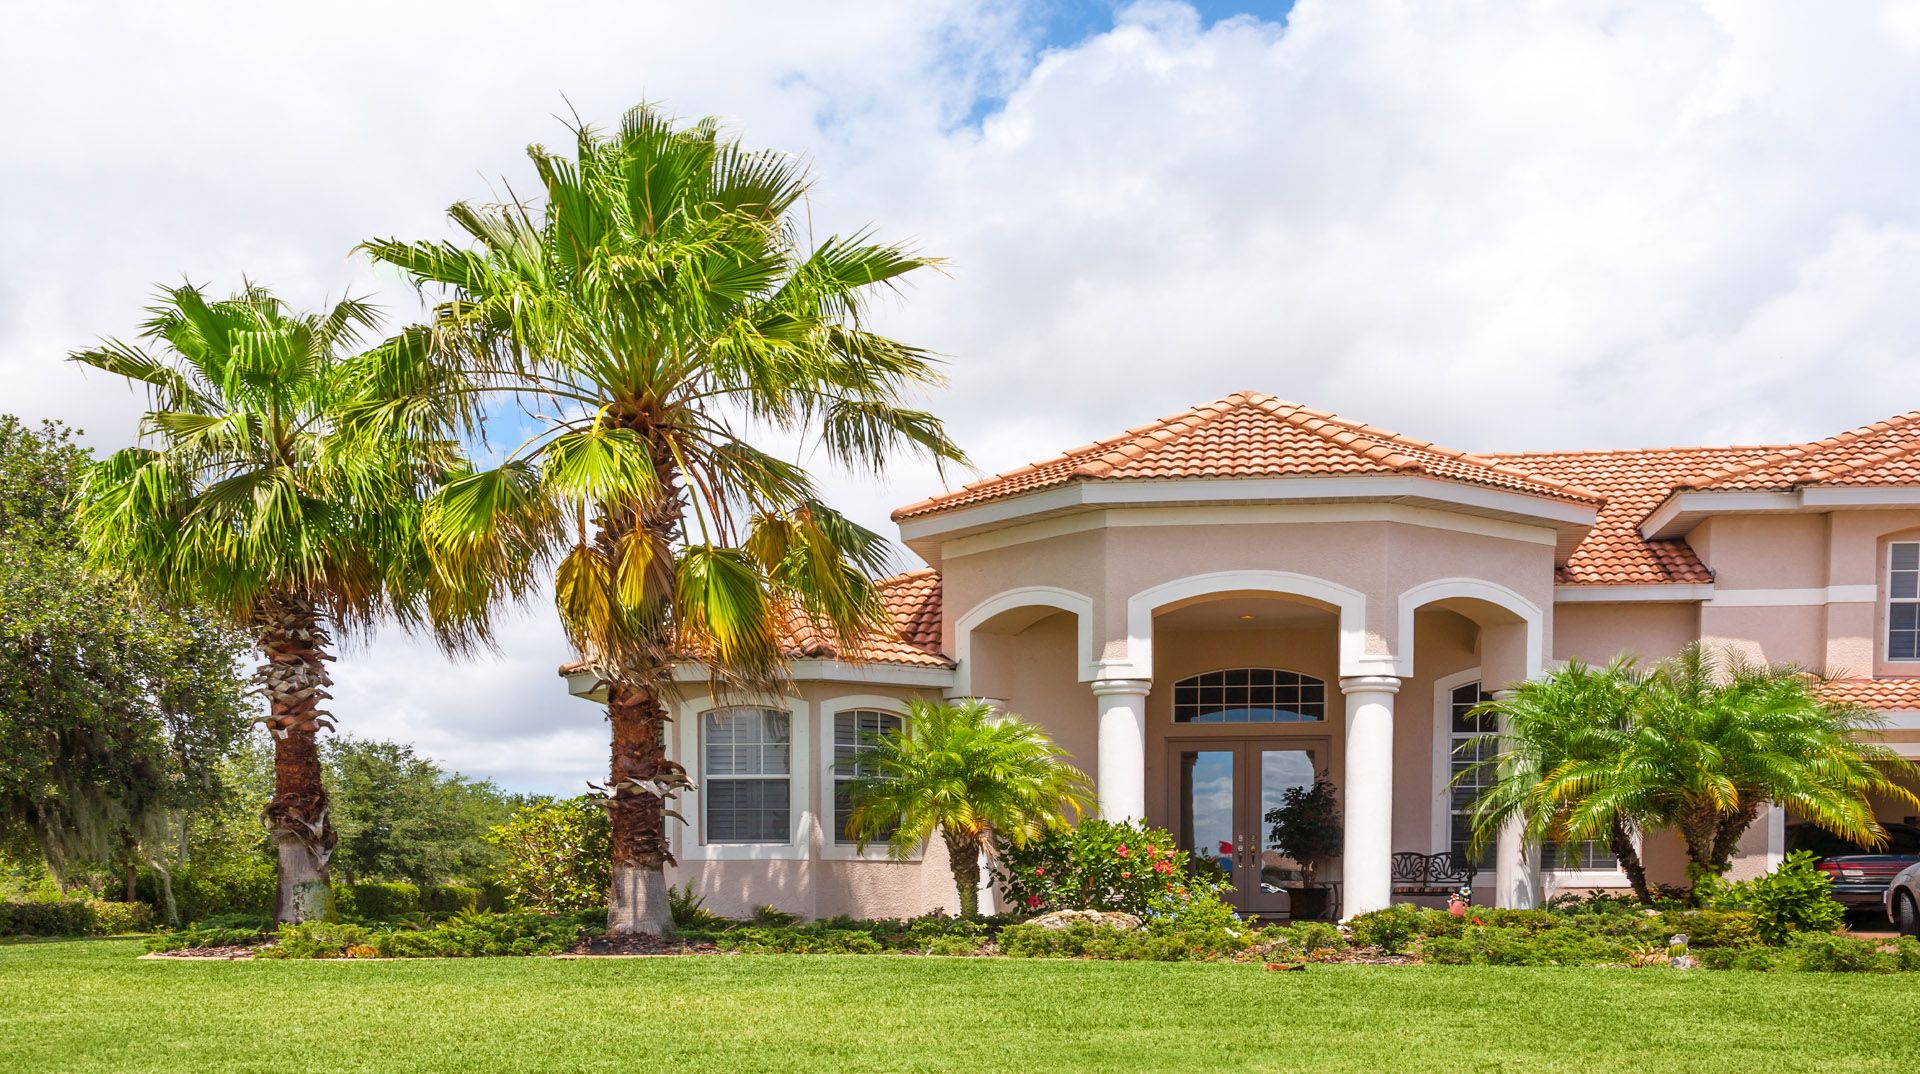 port st. lucie mortgage, mortgage rates port st. lucie, hutchinson island mortgage broker, port st. lucie mortgage lender, port st. lucie mortgage calculator, port st. lucie condo financing, port st. lucie condotel financing, port st. lucie condo mortgage, port st. lucie condotel mortgage,